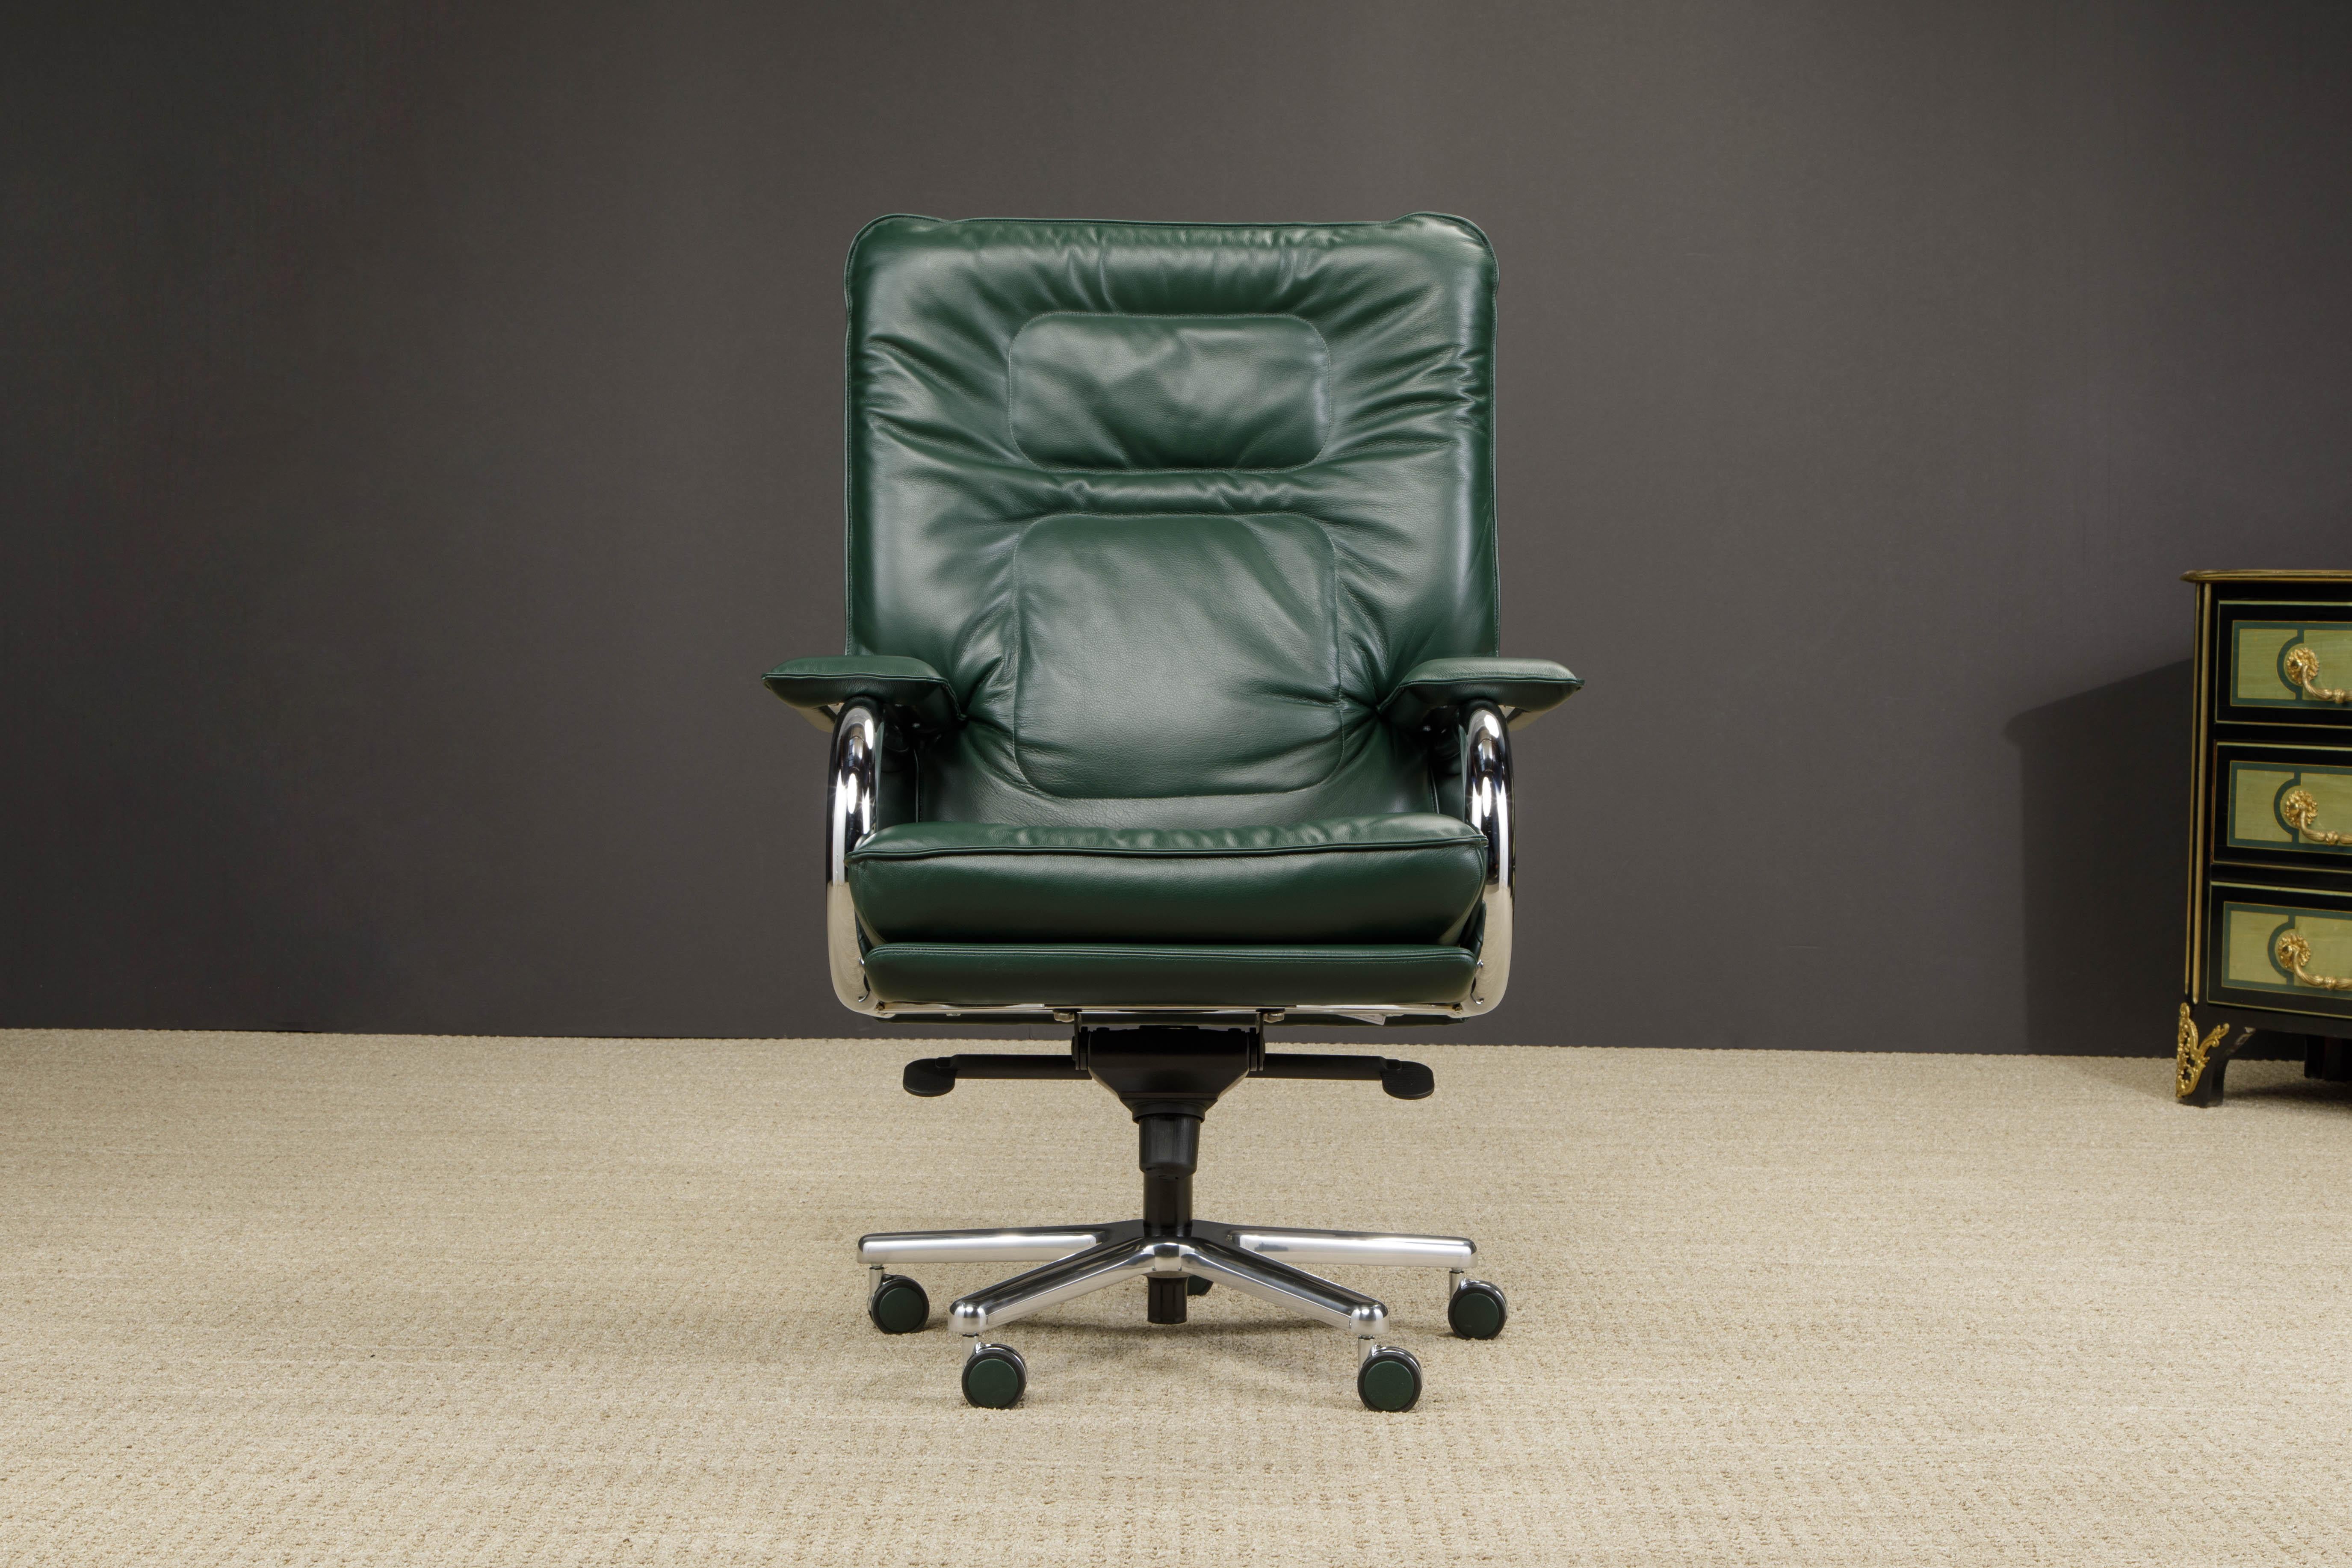 This incredible executives chair is named 'Big', designed by Guido Faleschini by i4 Mariani originally designed in the 1970s, this example newly produced in a gorgeous emerald green leather. 

*Note, we have three available for immediate shipment